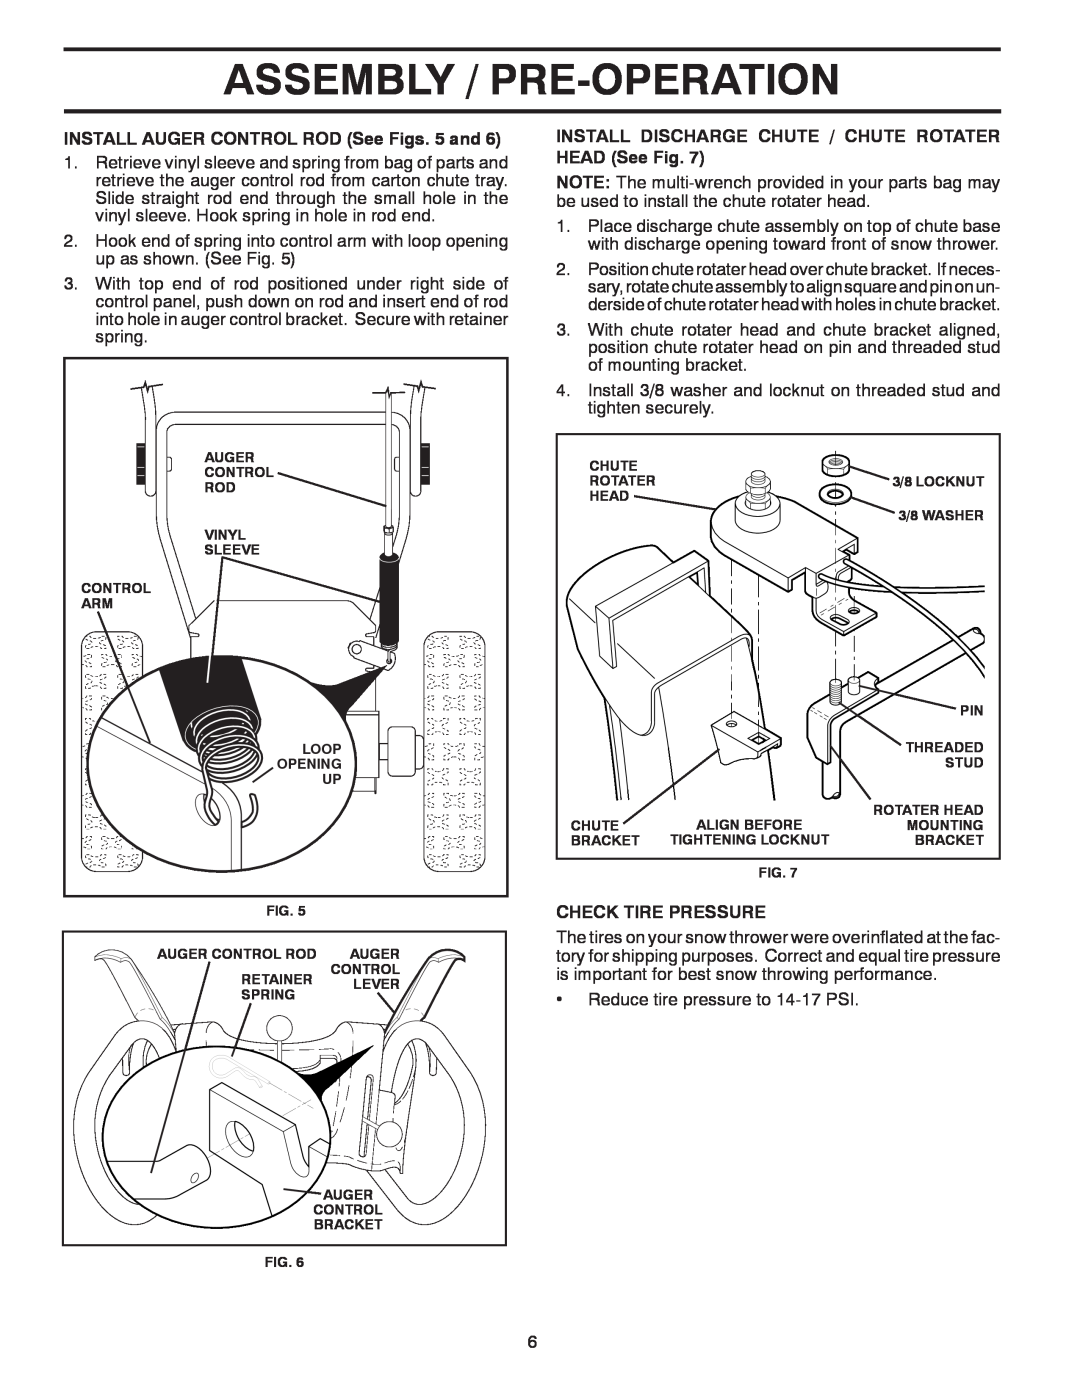 Poulan 436001, 96192003801 Assembly / Pre-Operation, INSTALL AUGER CONTROL ROD See Figs. 5 and, Check Tire Pressure 